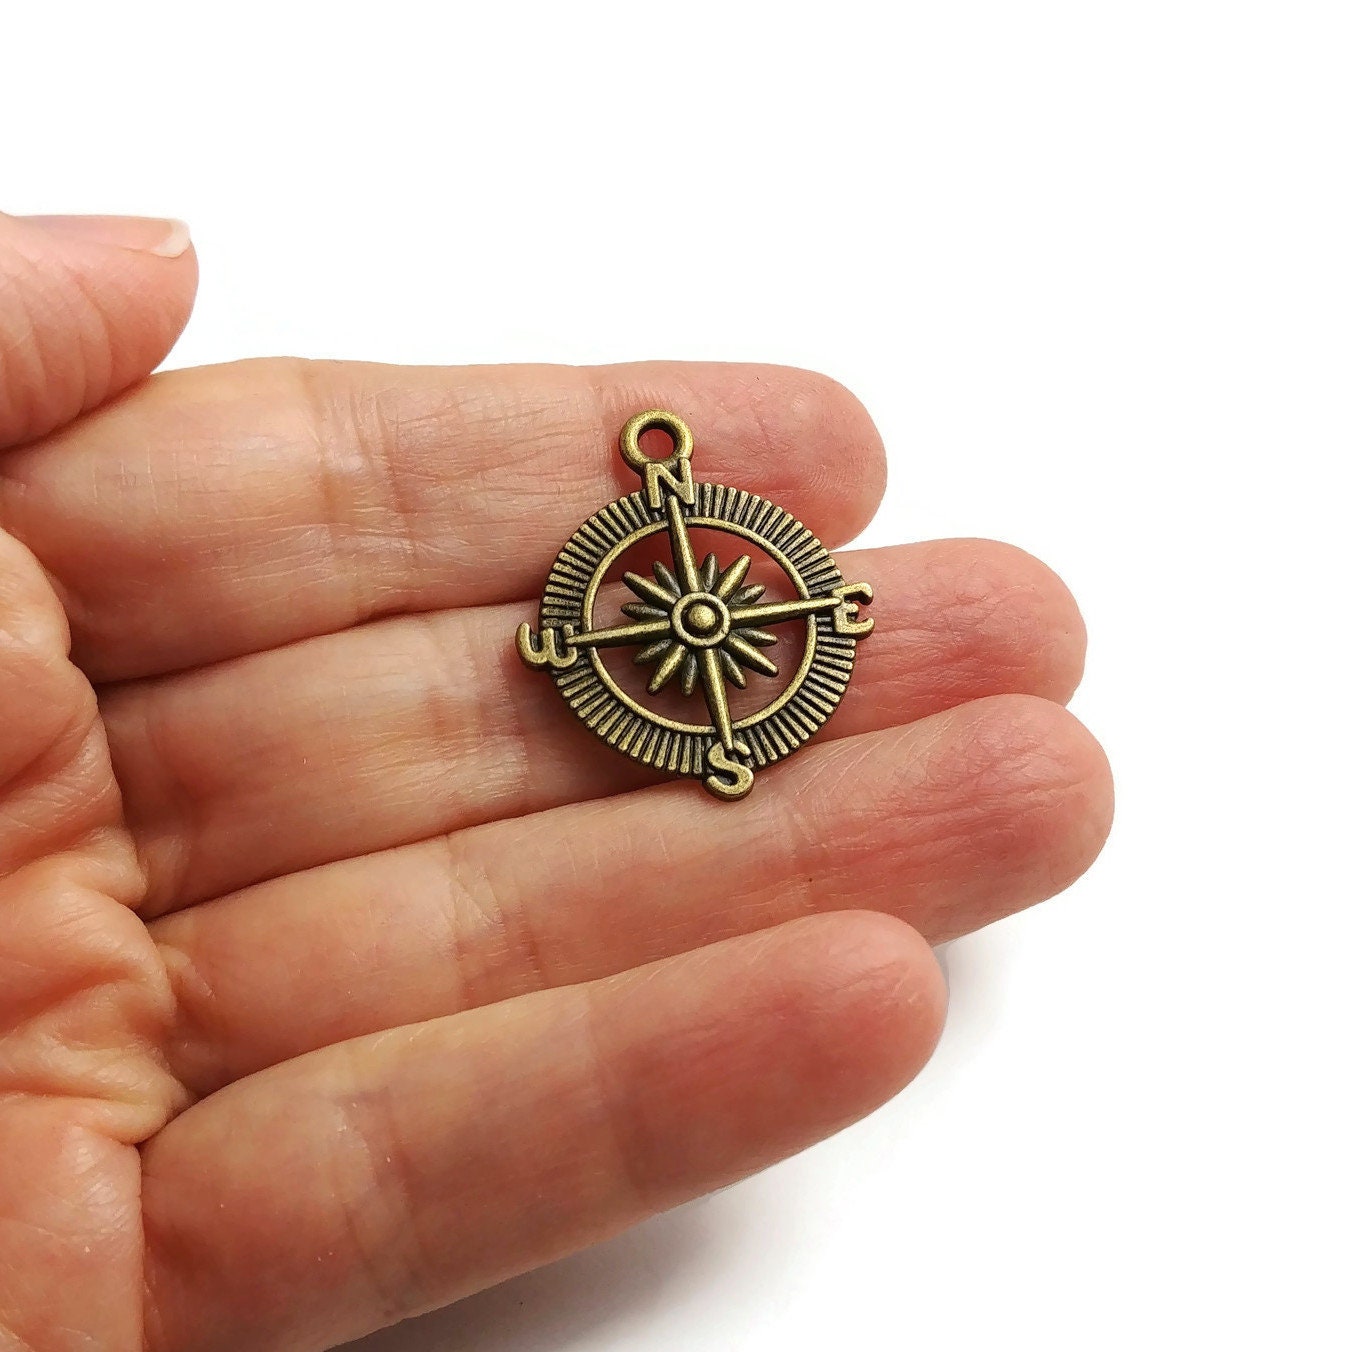 Compass rose charm, Hypoallergenic DIY necklace pendant, Travel nautical pendant, gold bronze silver plated charms